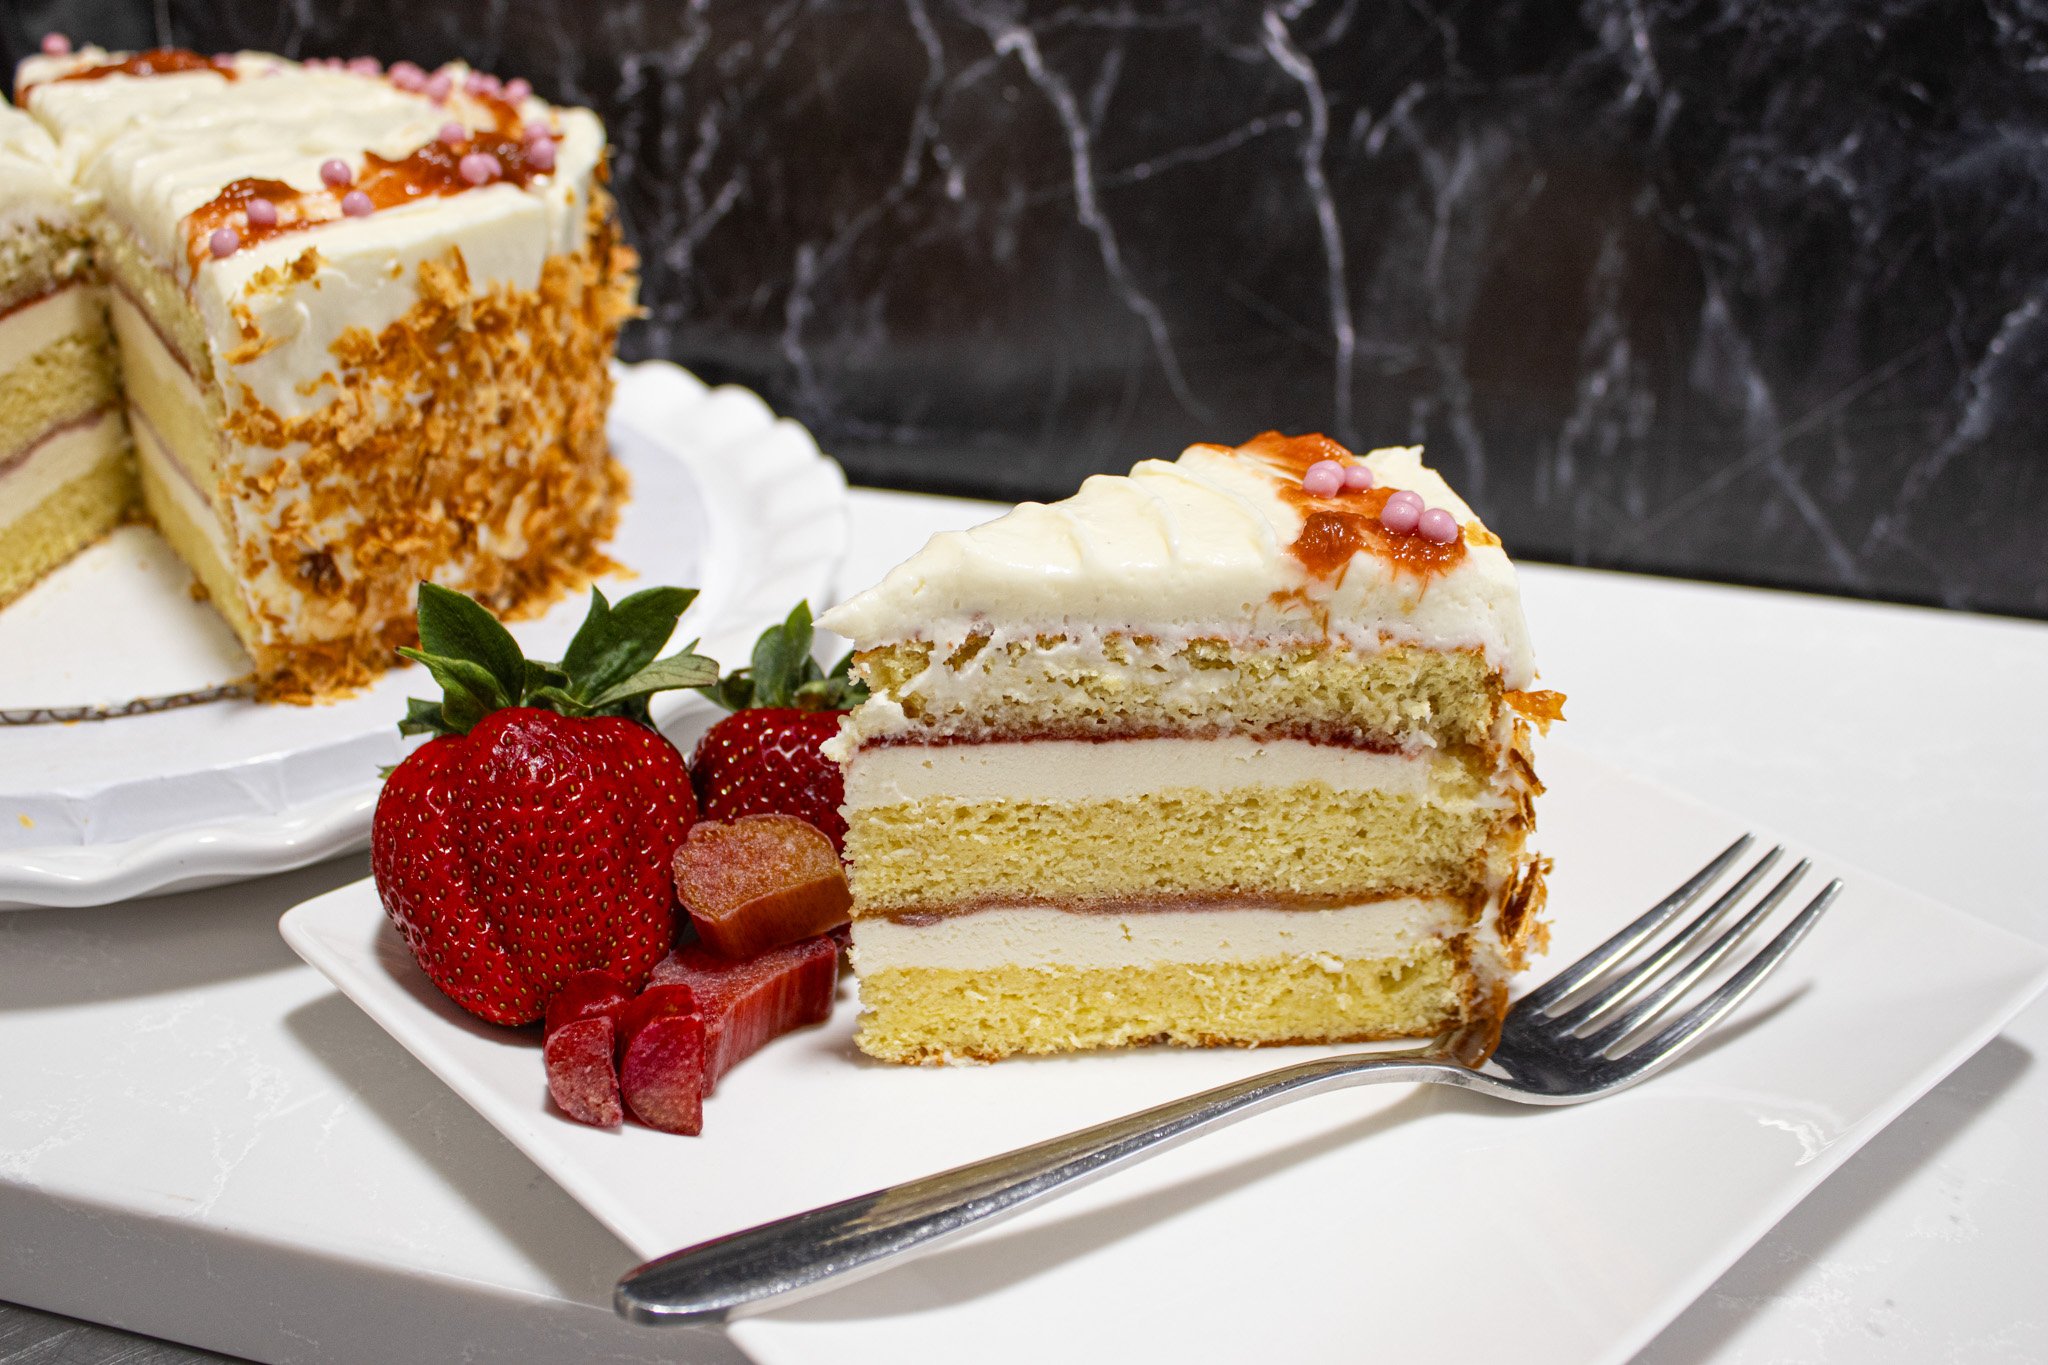 We have this delicious strawberry rhubarb sponge cake available this week! It's a vanilla sponge, cream cheese buttercream, and of course, strawberry and rhubarb. Are you a fan of rhubarb?
.
Order online for pickup or delivery: https://whiskandarrow.